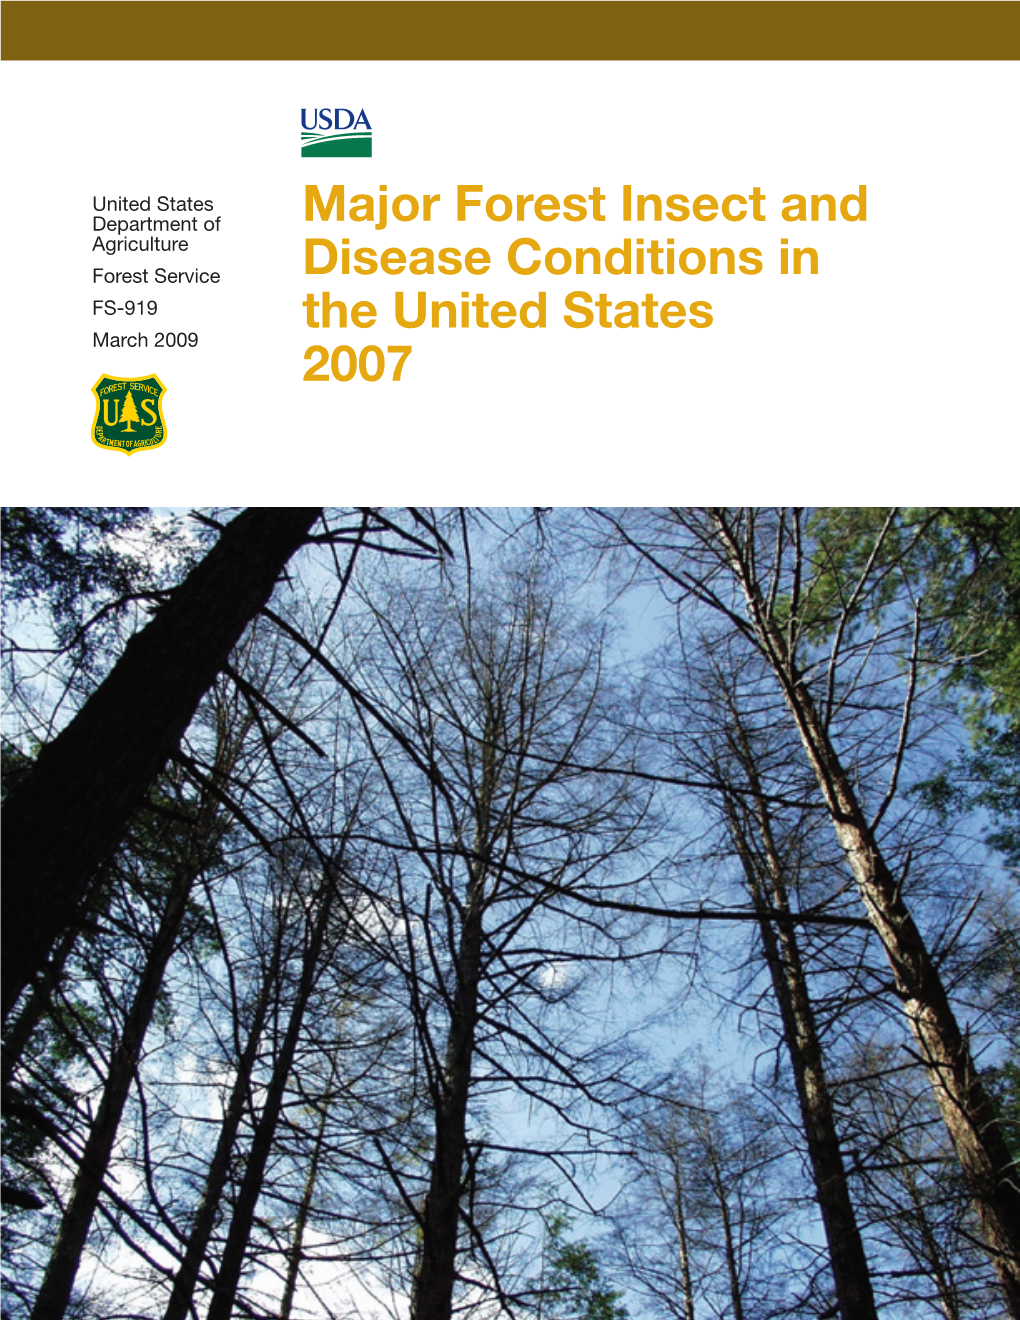 Major Forest Insect and Disease Conditions in the United States 2007